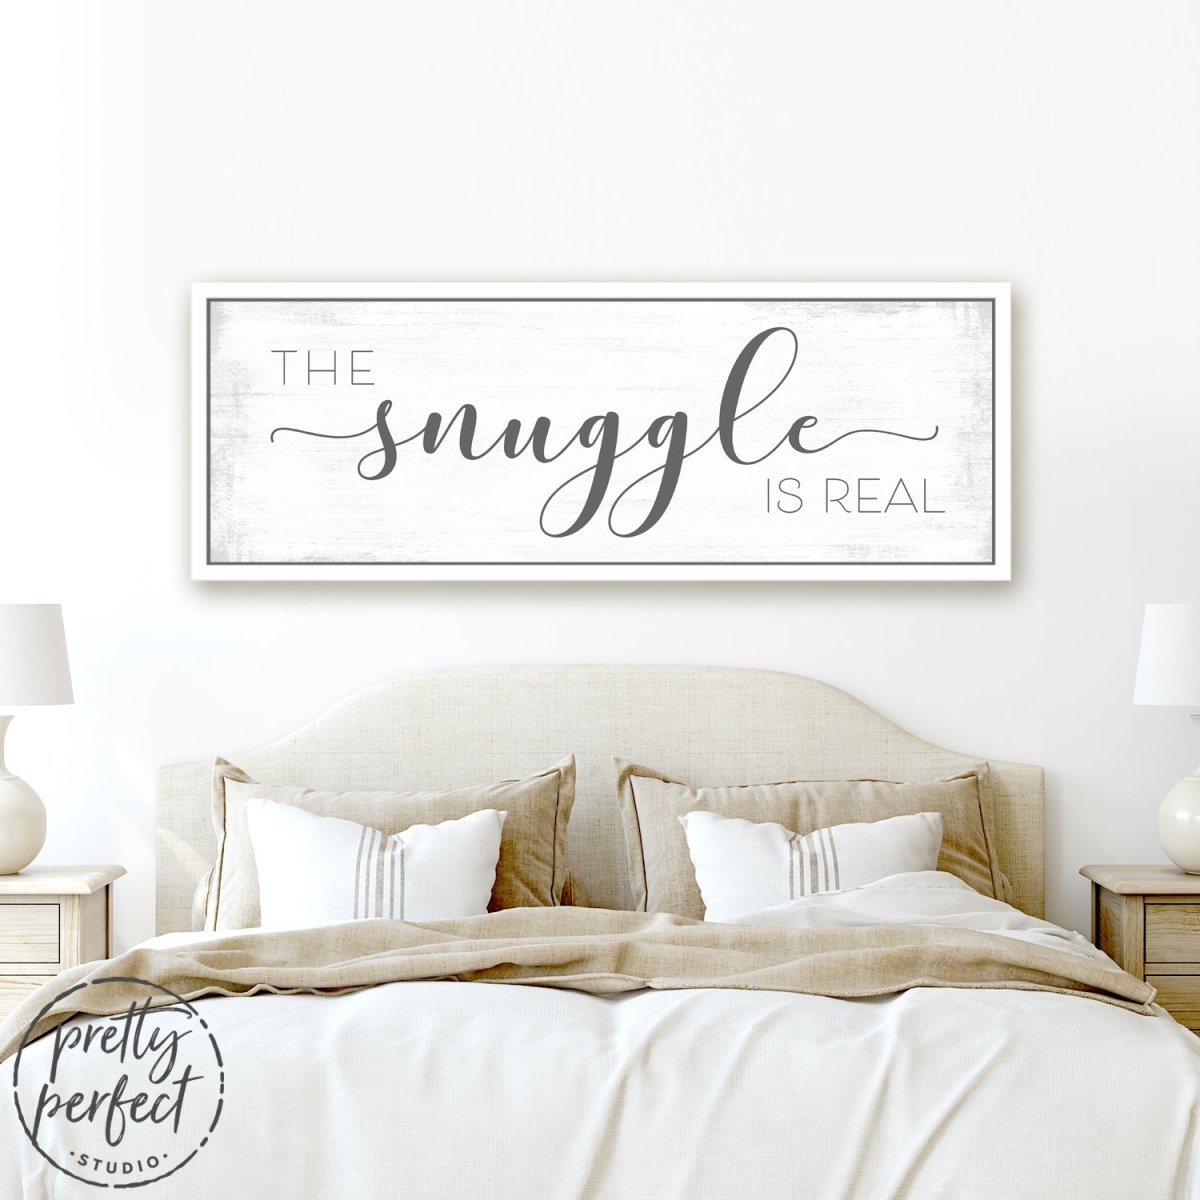 The Snuggle Is Real Sign Above Bed in Masters Bedroom - Pretty Perfect Studio